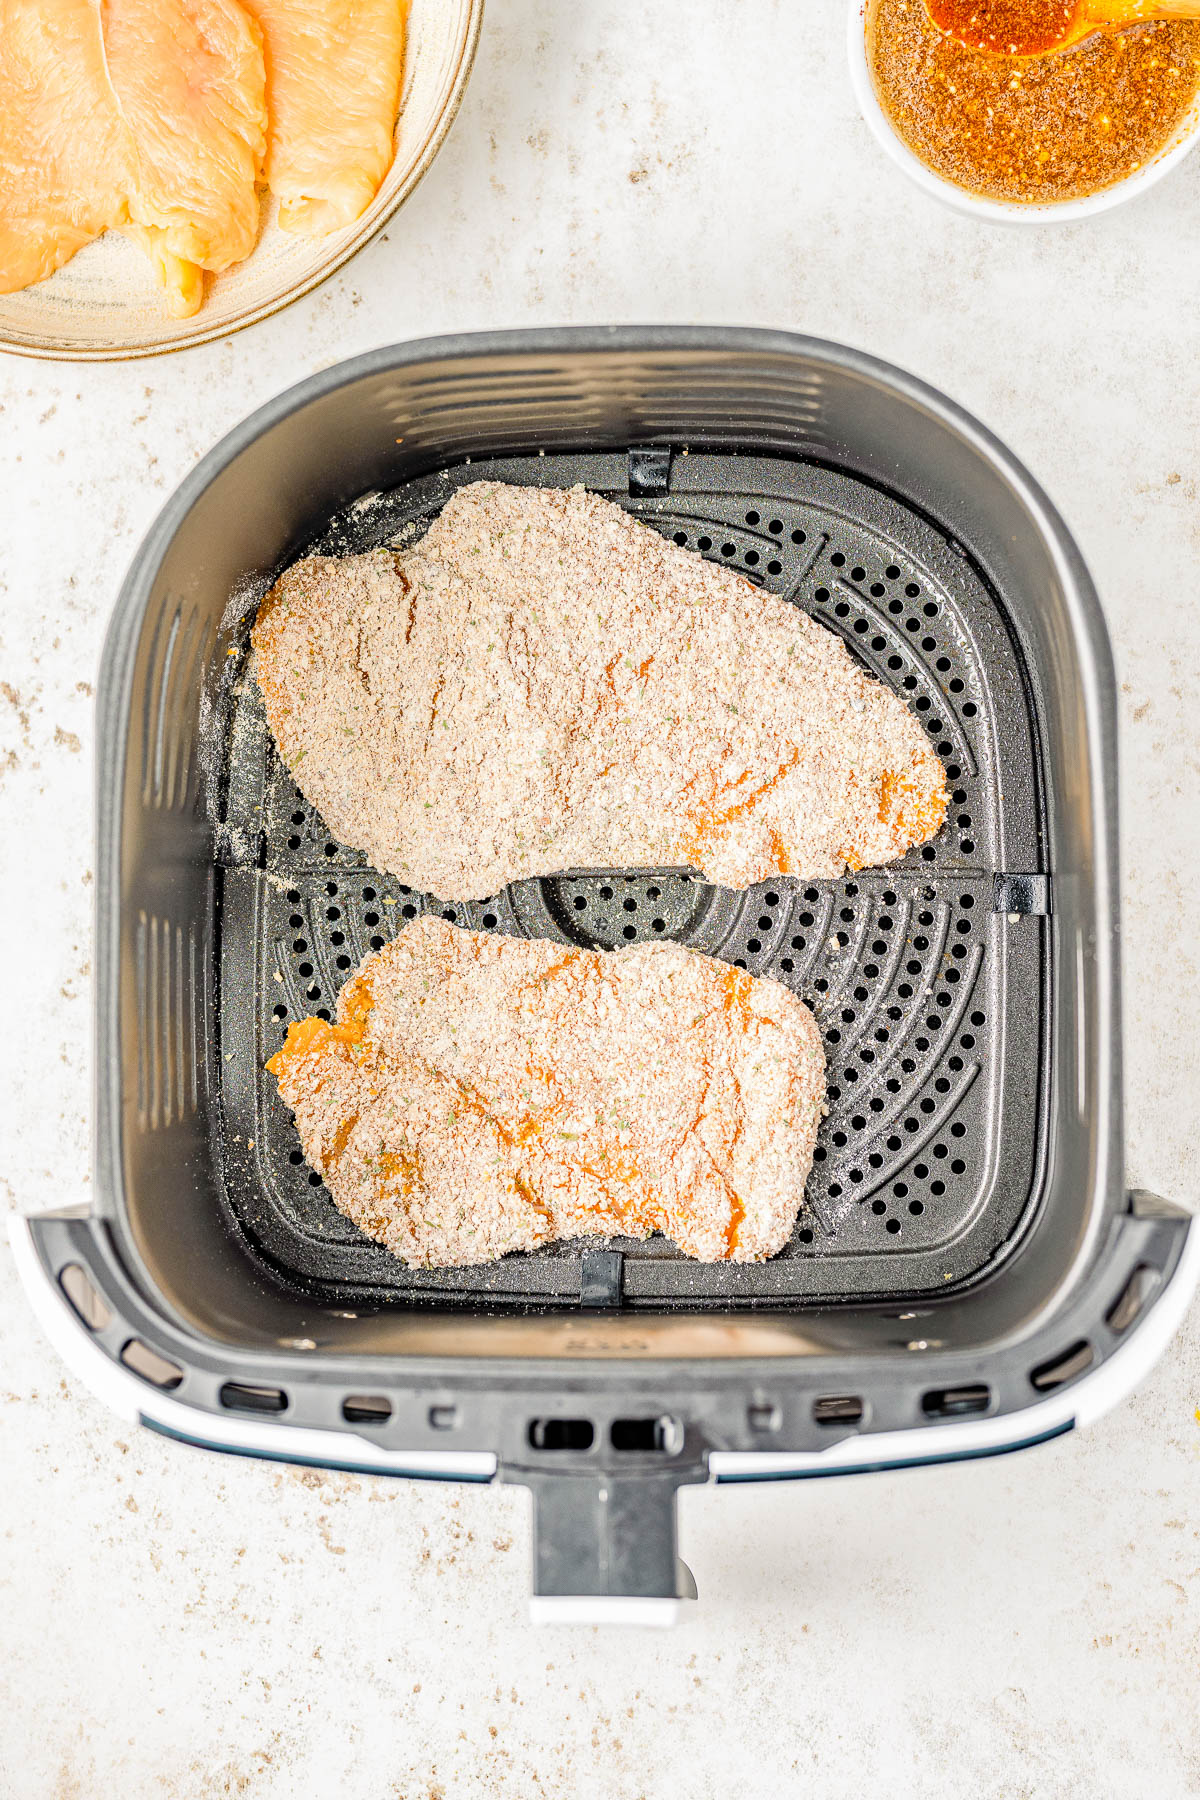 Air Fryer Hot Honey Chicken — Breaded chicken cutlets are air fried until crispy, then drizzled with spicy-sweet hot honey! This is such a QUICK and EASY air fryer chicken recipe that takes less than 30 minutes to prepare! Oven-baking instructions are also provided.